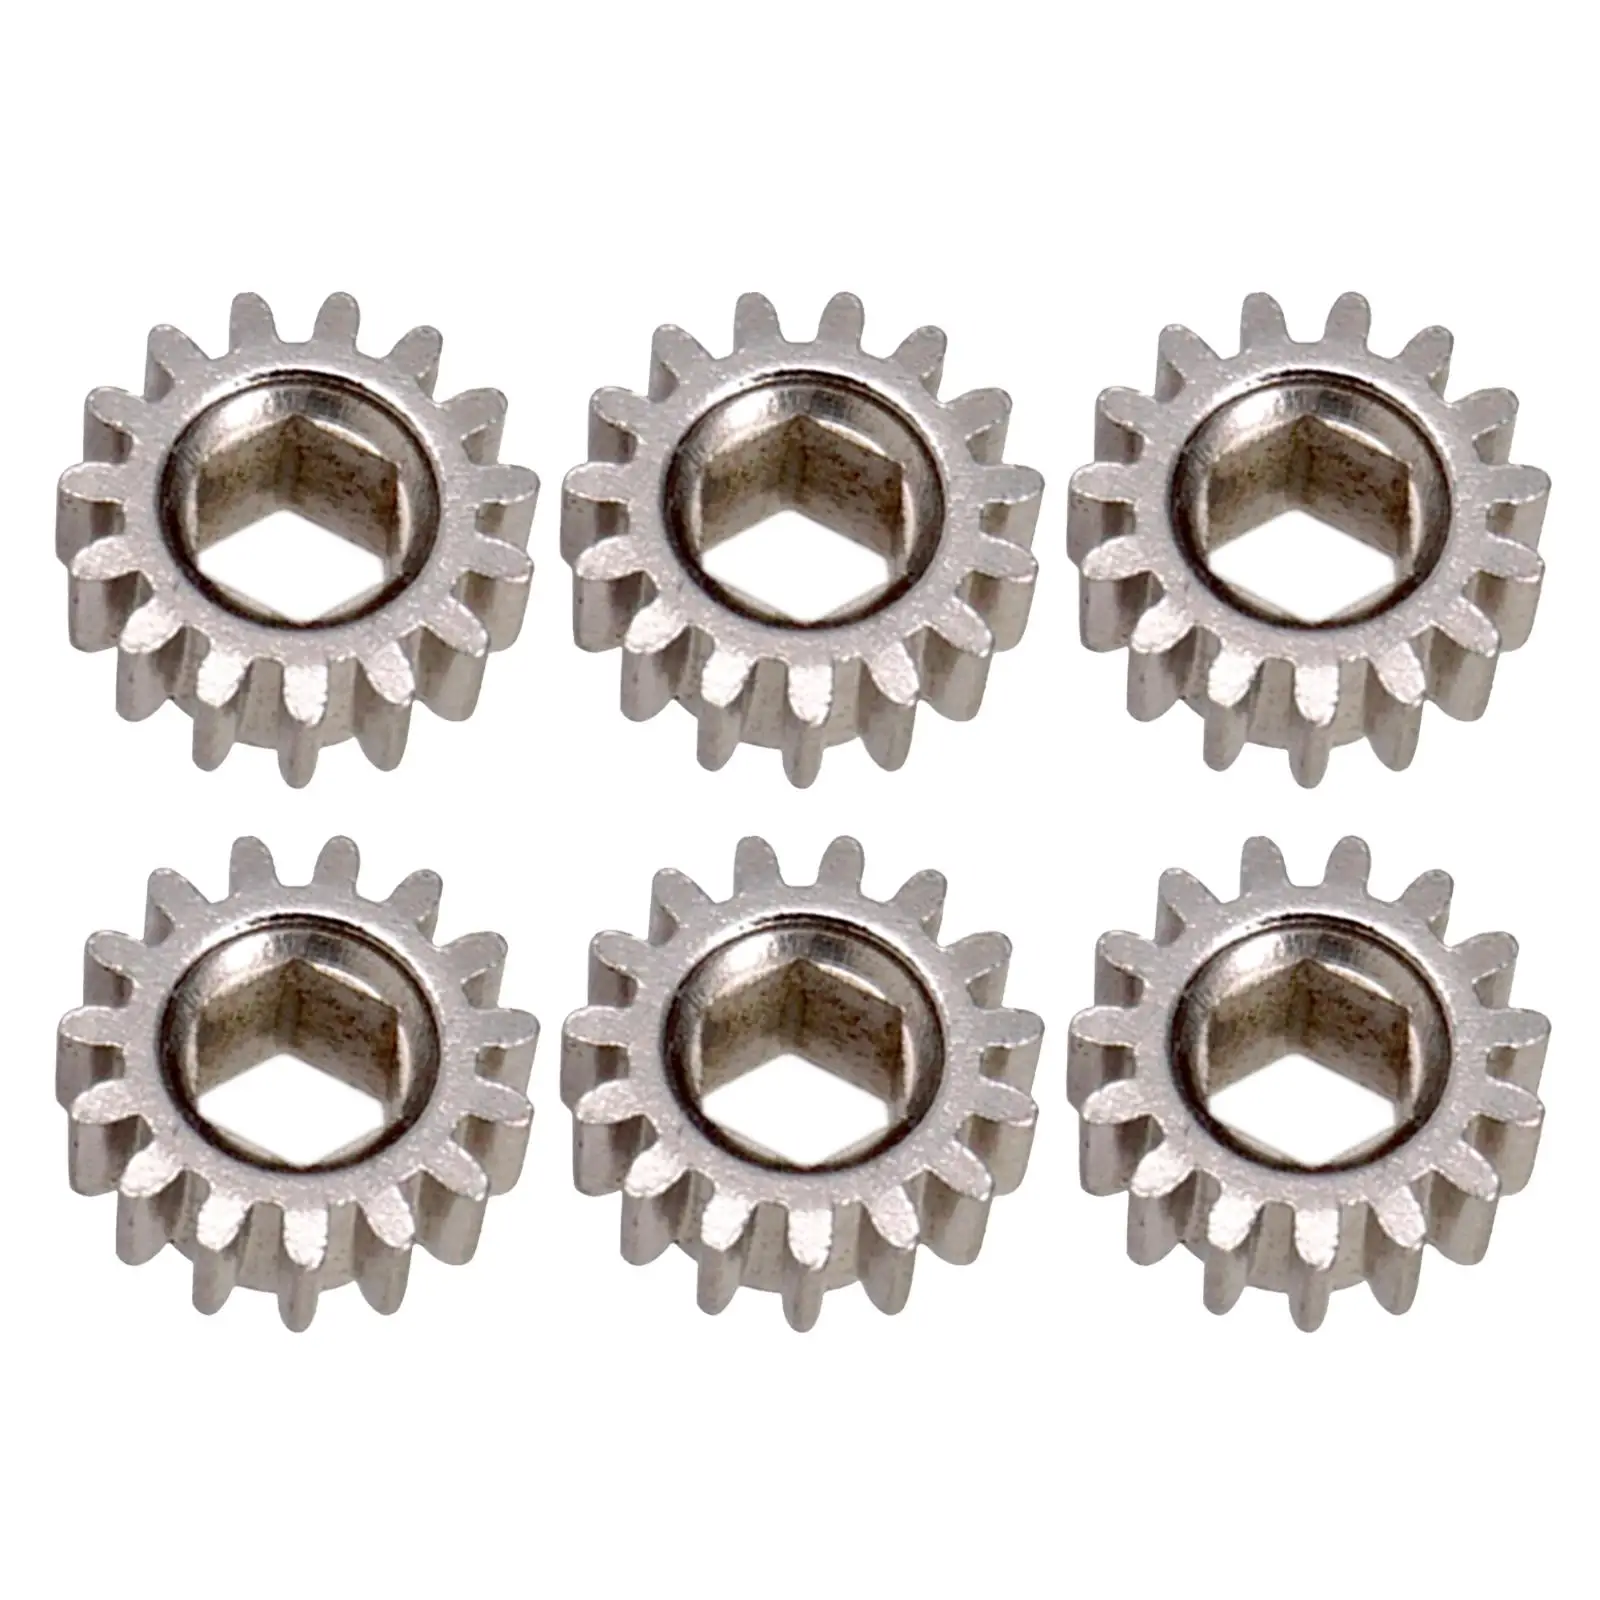 6pcs Classical Pegs Machine Heads Mount Hex Hole Gears 1:18/1:15